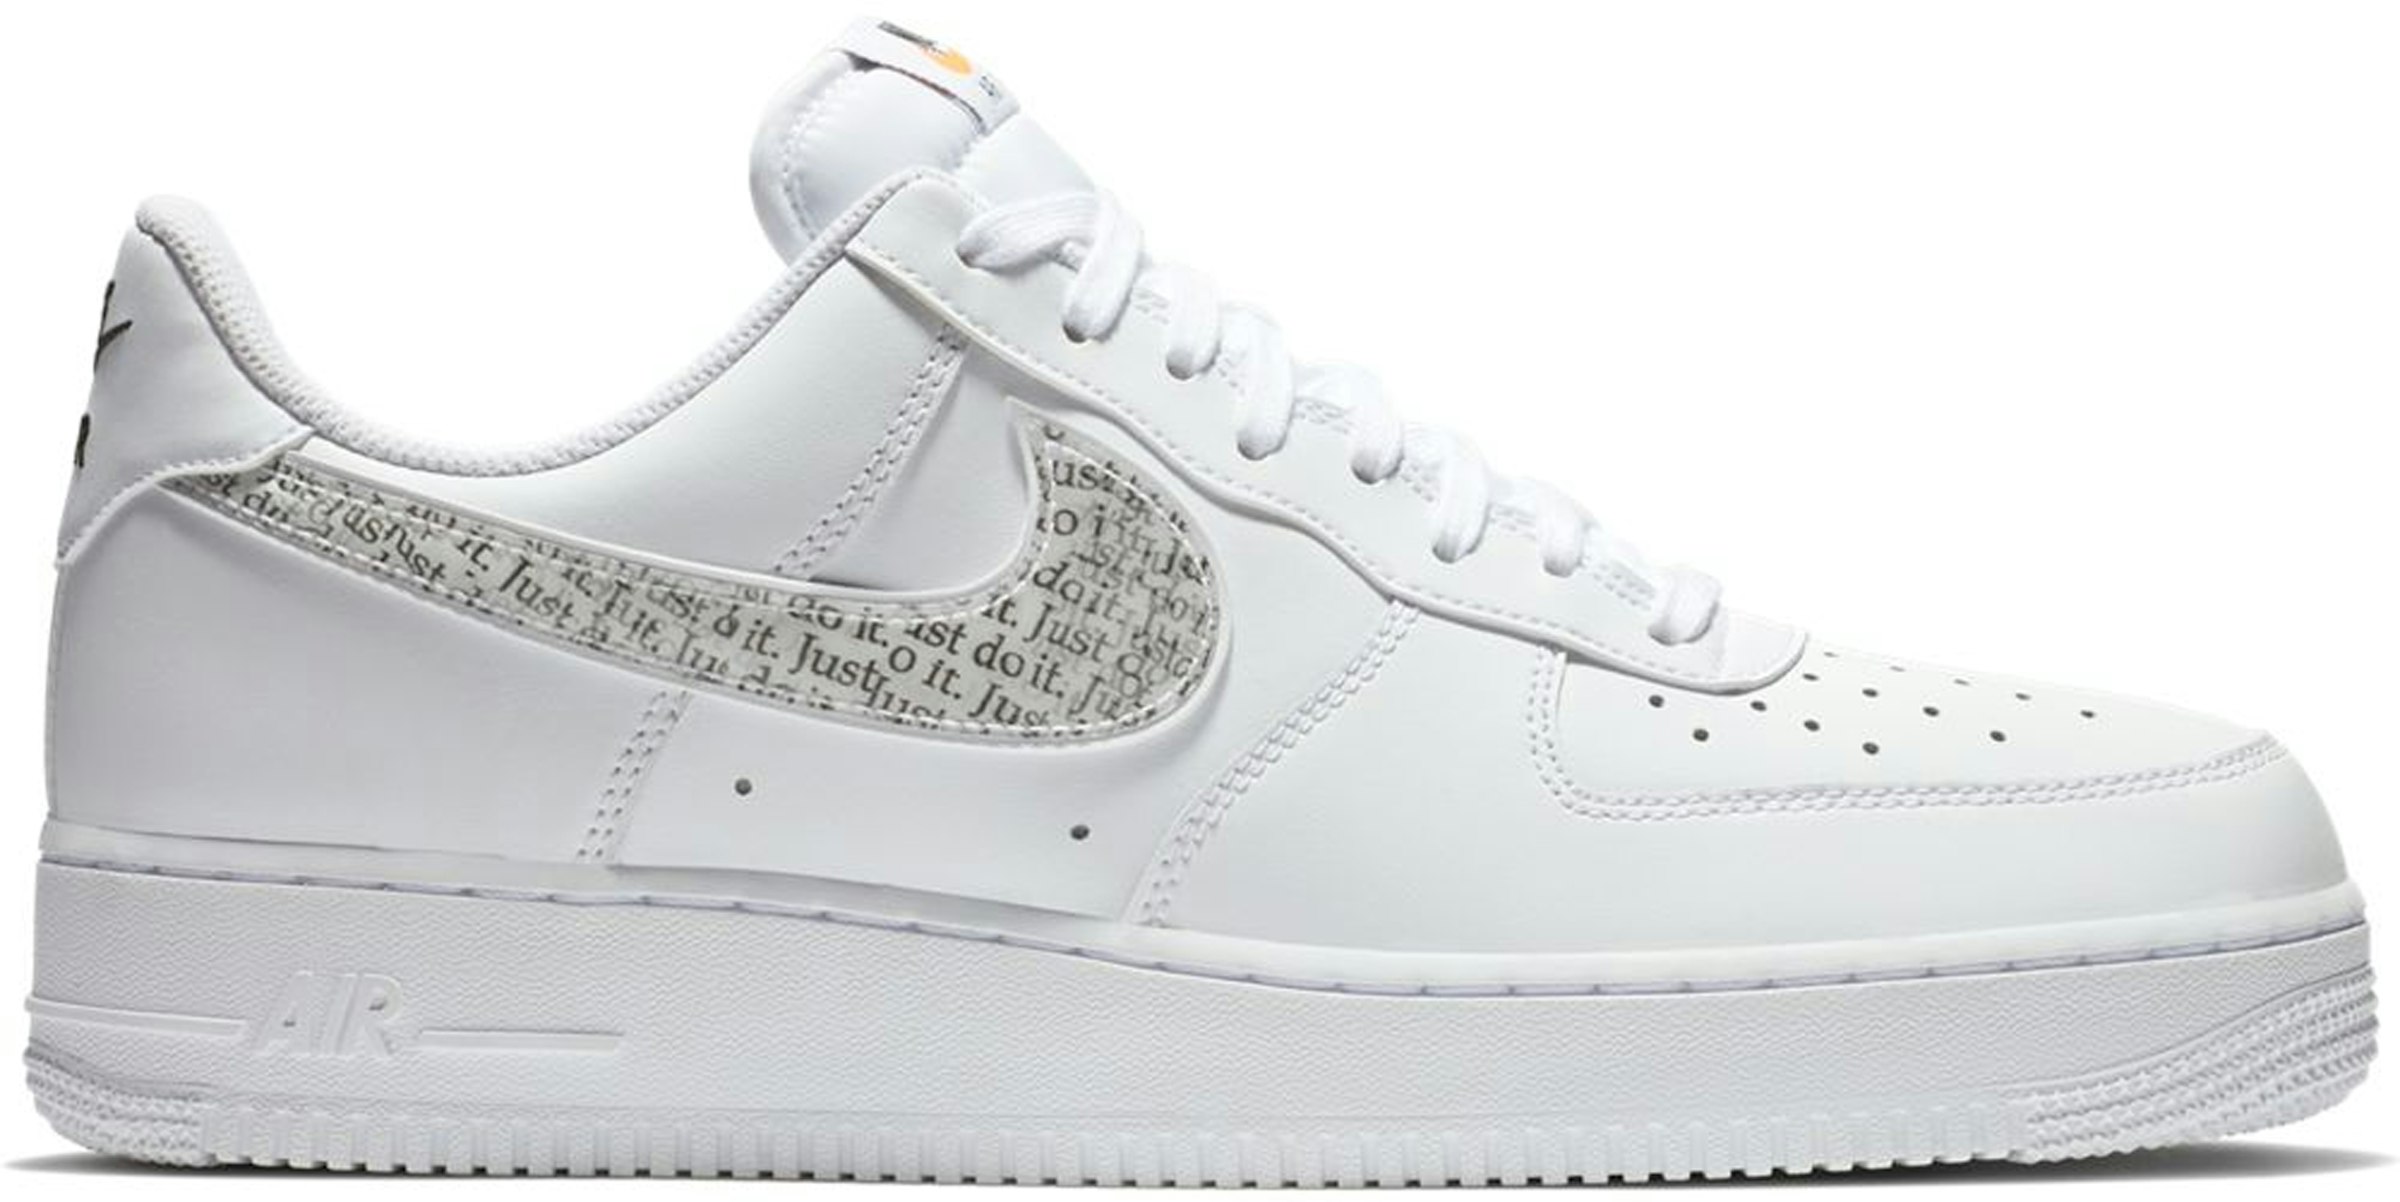 Nike Air Force 1 Just Do It Pack White Clear Men's - BQ5361-100 -